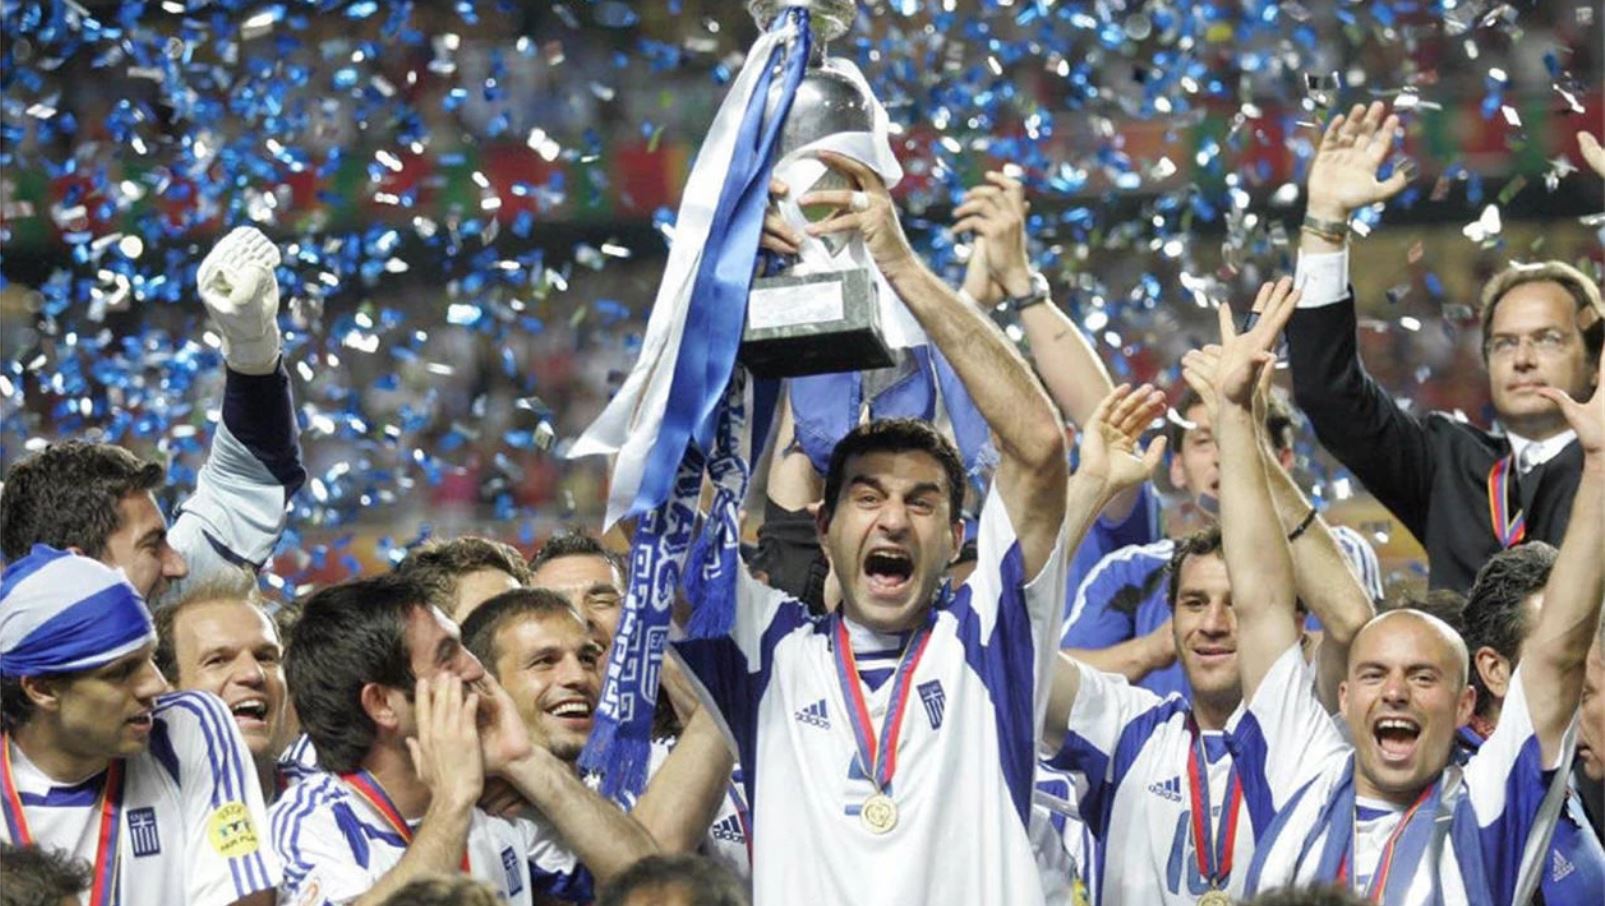 Euro 2004 could be regarded as one of the most exciting edition of the European Championship ever, given Greece's incredible victory